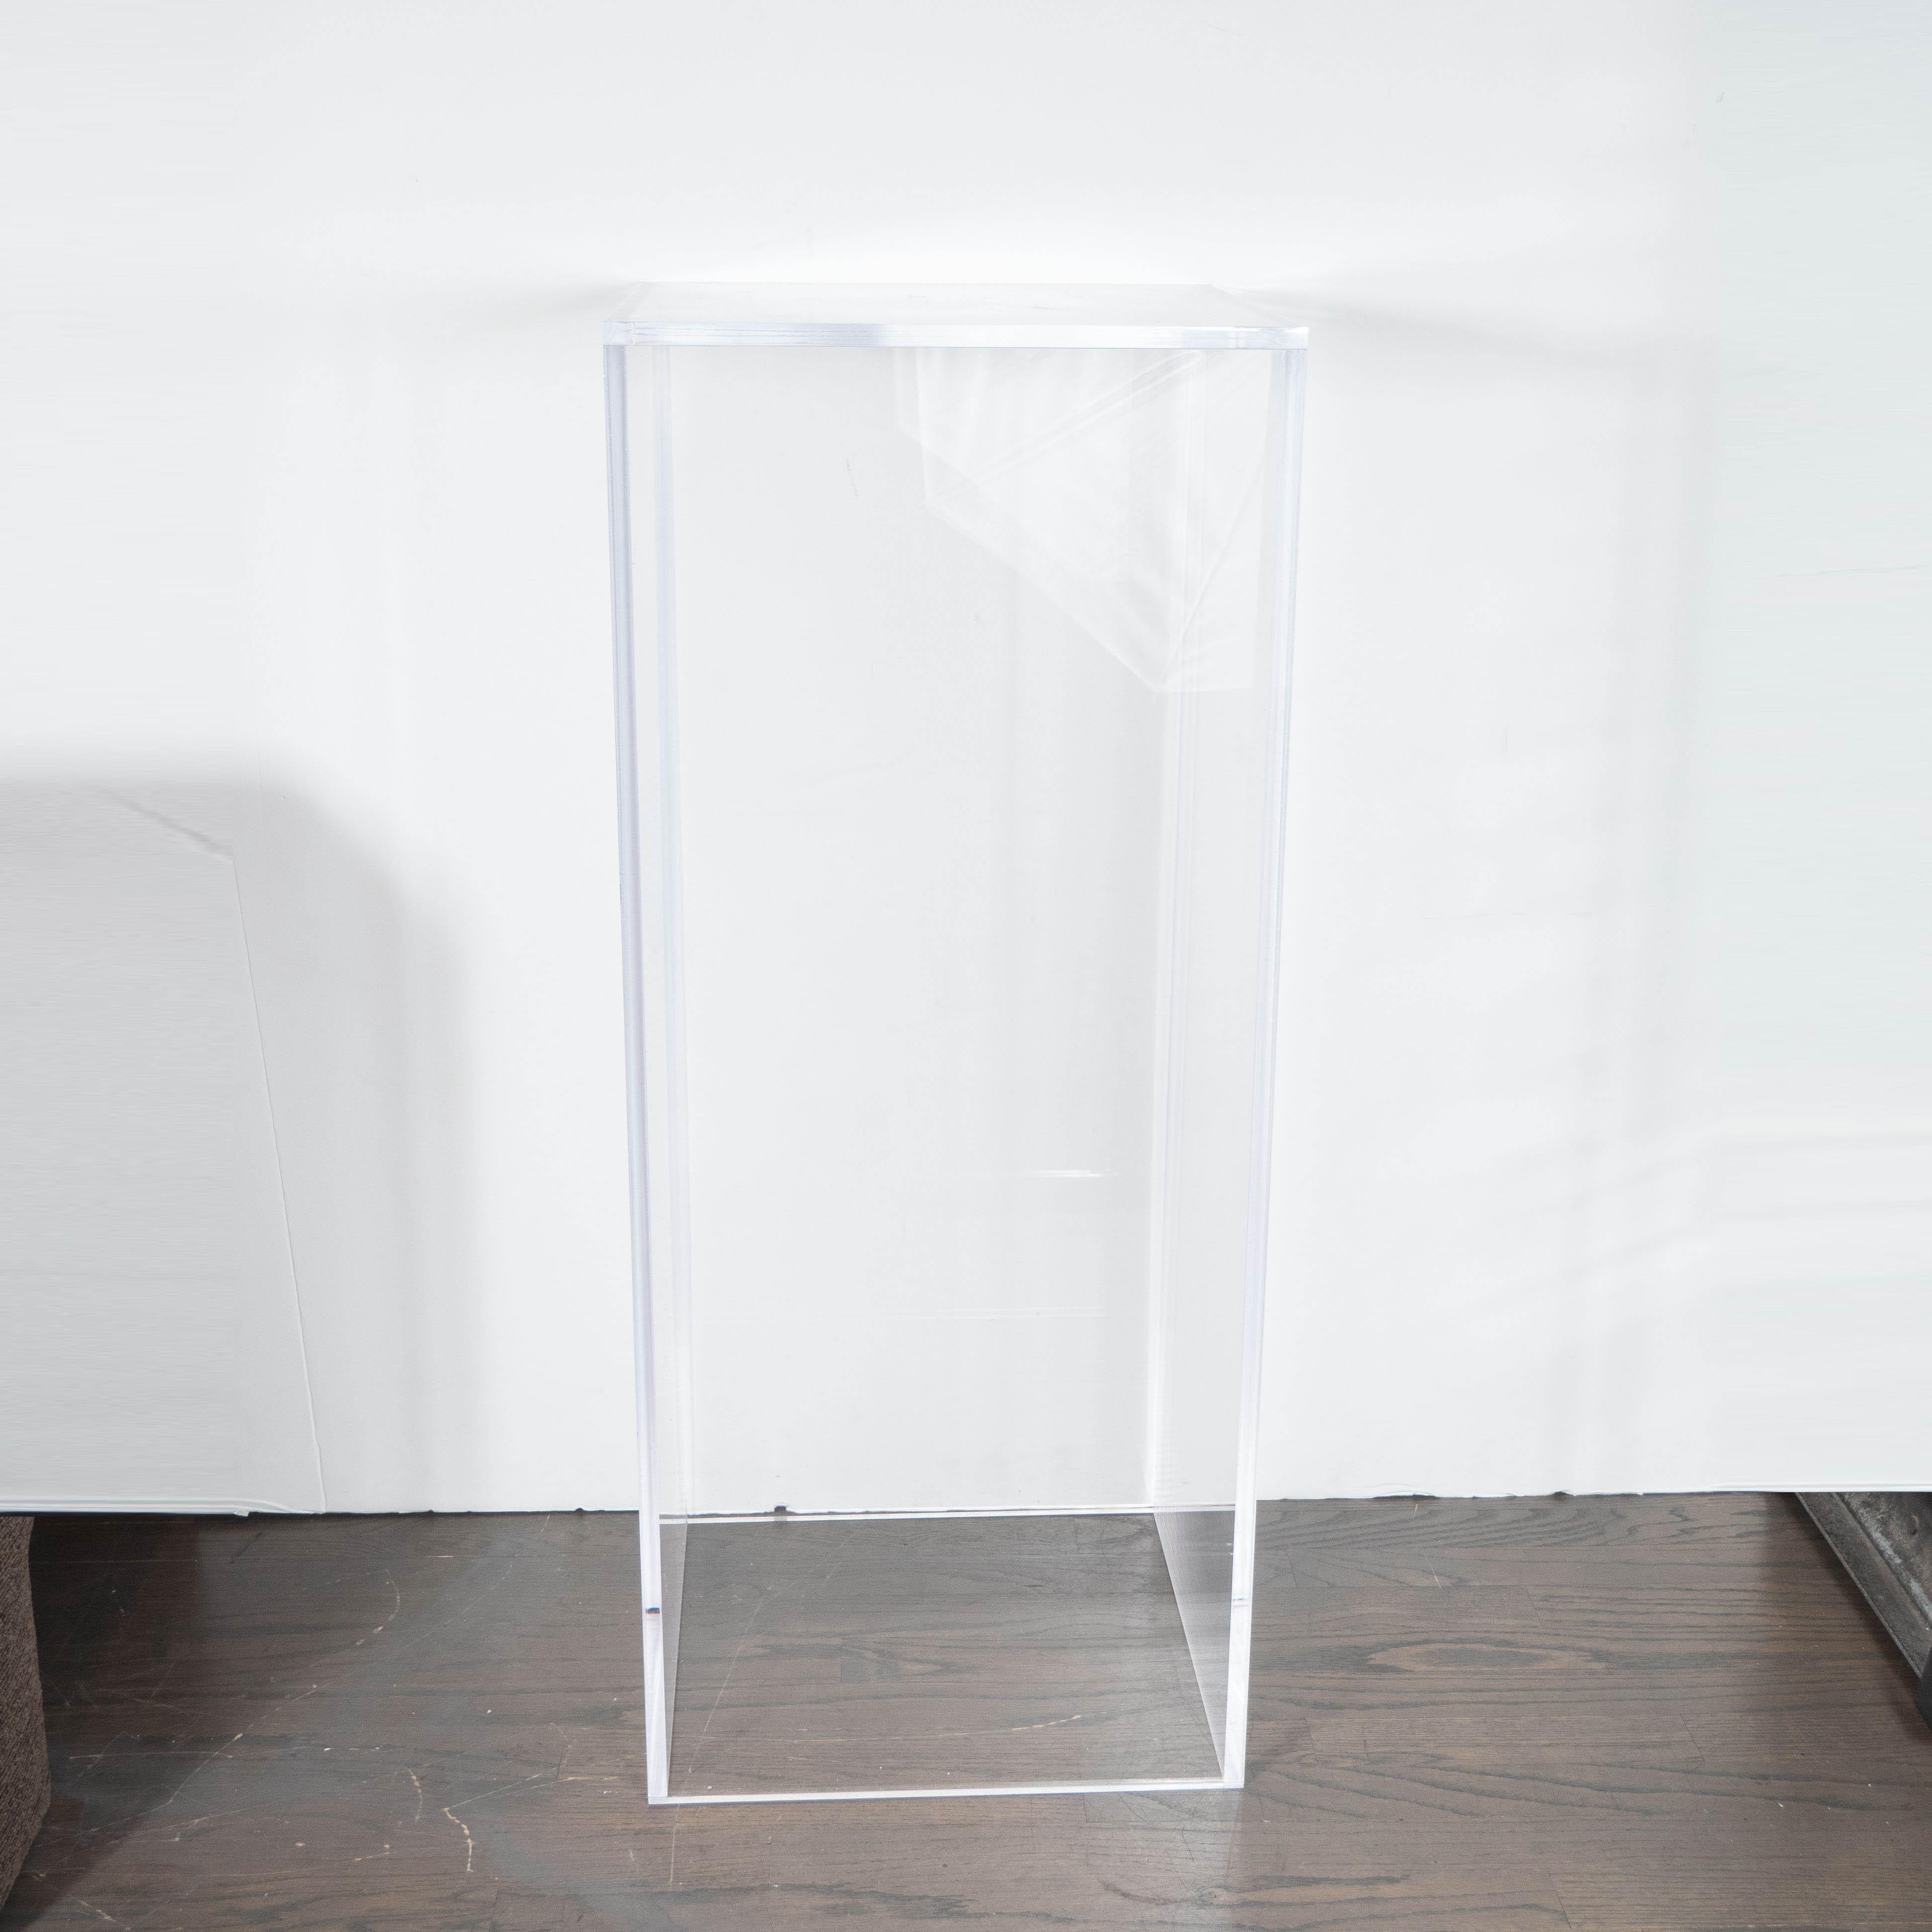 This elegant and austere Mid-Century Modern pedestal was realized in the United States in the latter half of the 20th century. It features a volumetric rectangular form created in translucent Lucite. With its clean lines and austere silhouette, this